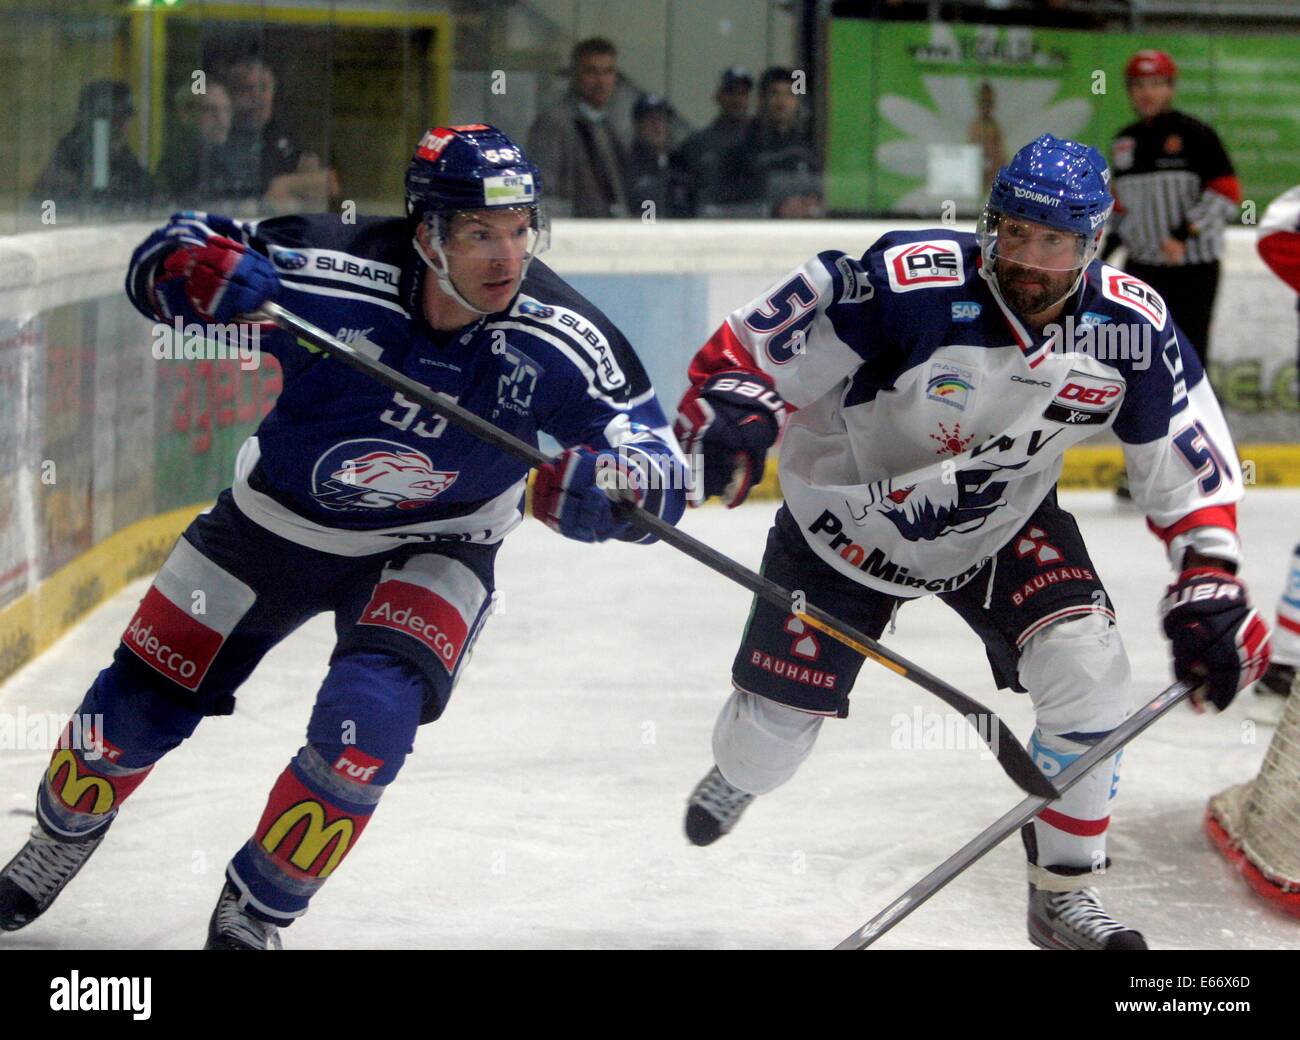 Bad Toelz, Bavaria, Germany. 15th Aug, 2014. from left Morris TRACHSLER/Zuerich, Glen METROPOLIT/CAN/Mannheim.two top teams from Germany and Switzerland meet for a ice hockey friendly as preparation for the season, ZSC Lions Zuerich vs Adler Mannheim, August 15, 2014, Bad Toelz, Germany, Credit:  Wolfgang Fehrmann/Wolfgang Fehrmann/ZUMA Wire/Alamy Live News Stock Photo